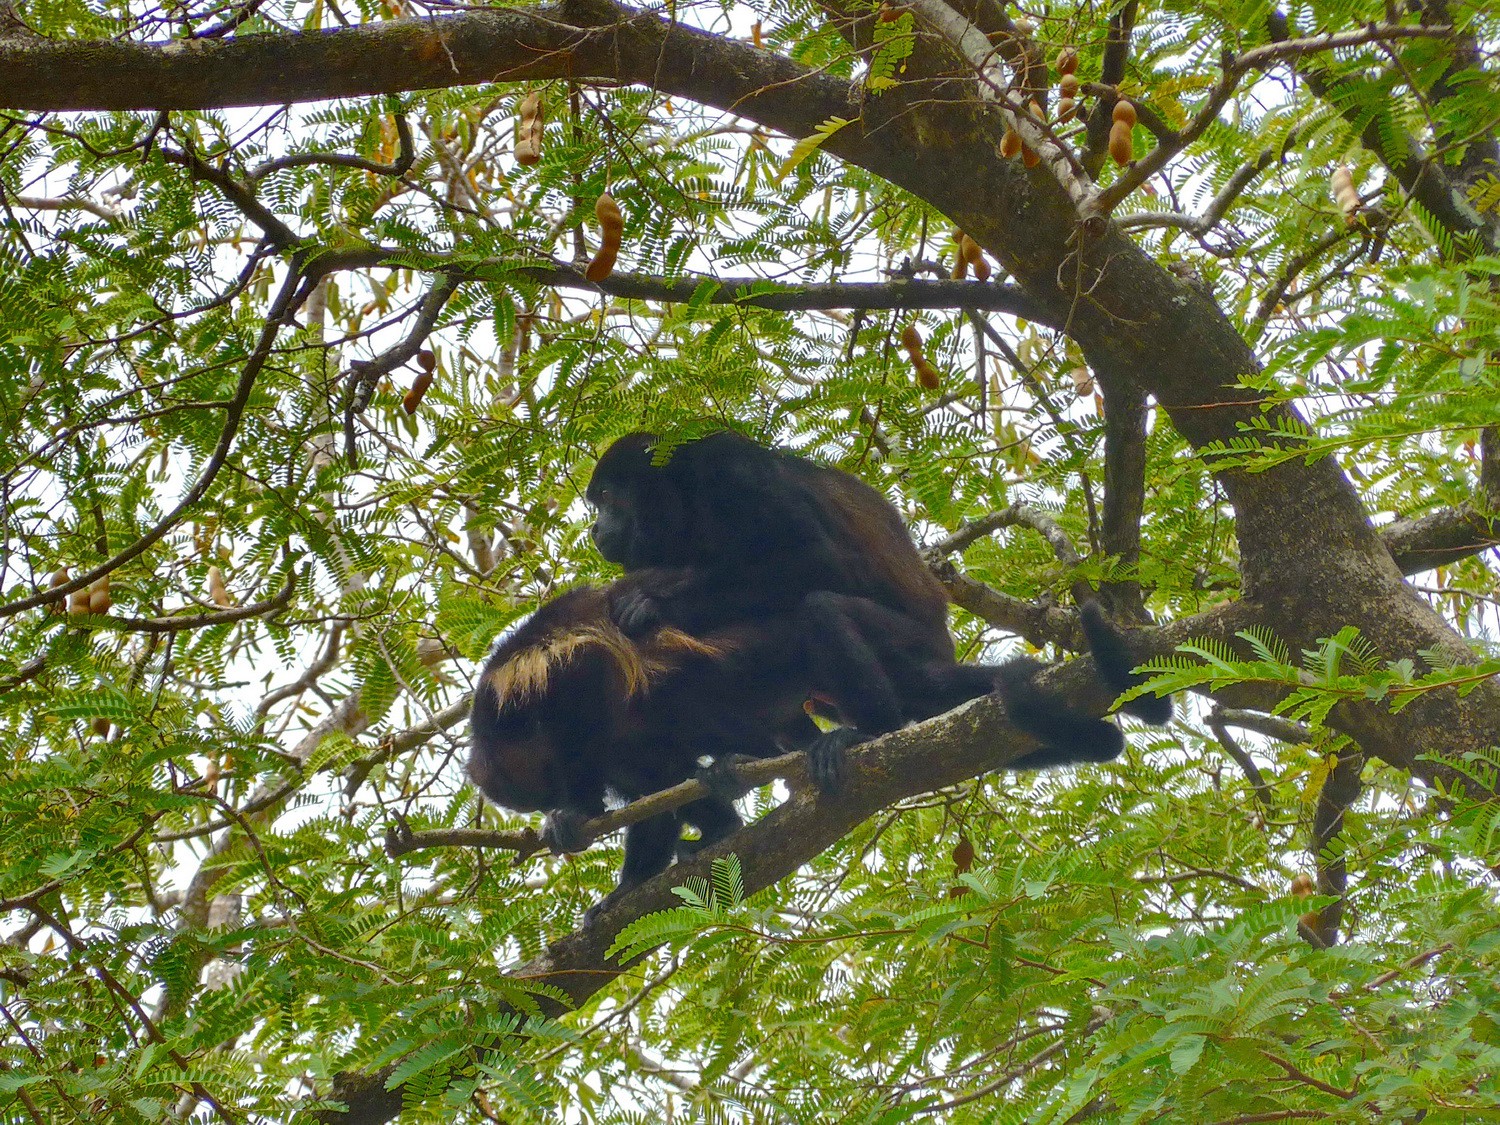 Mating Howler Monkeys on our campsite